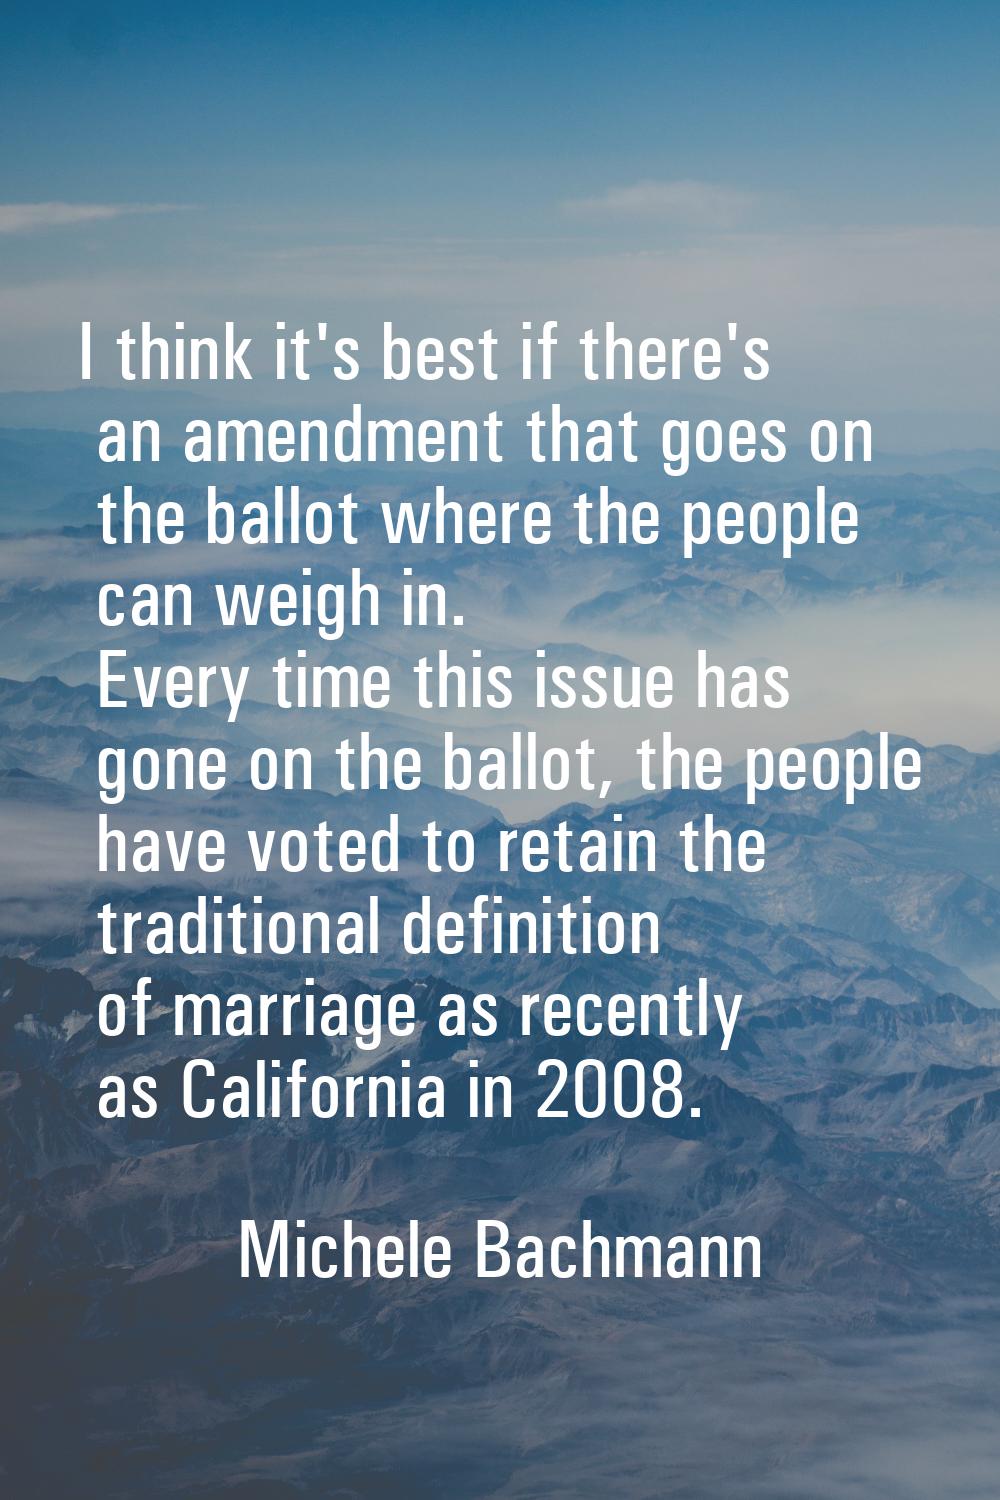 I think it's best if there's an amendment that goes on the ballot where the people can weigh in. Ev